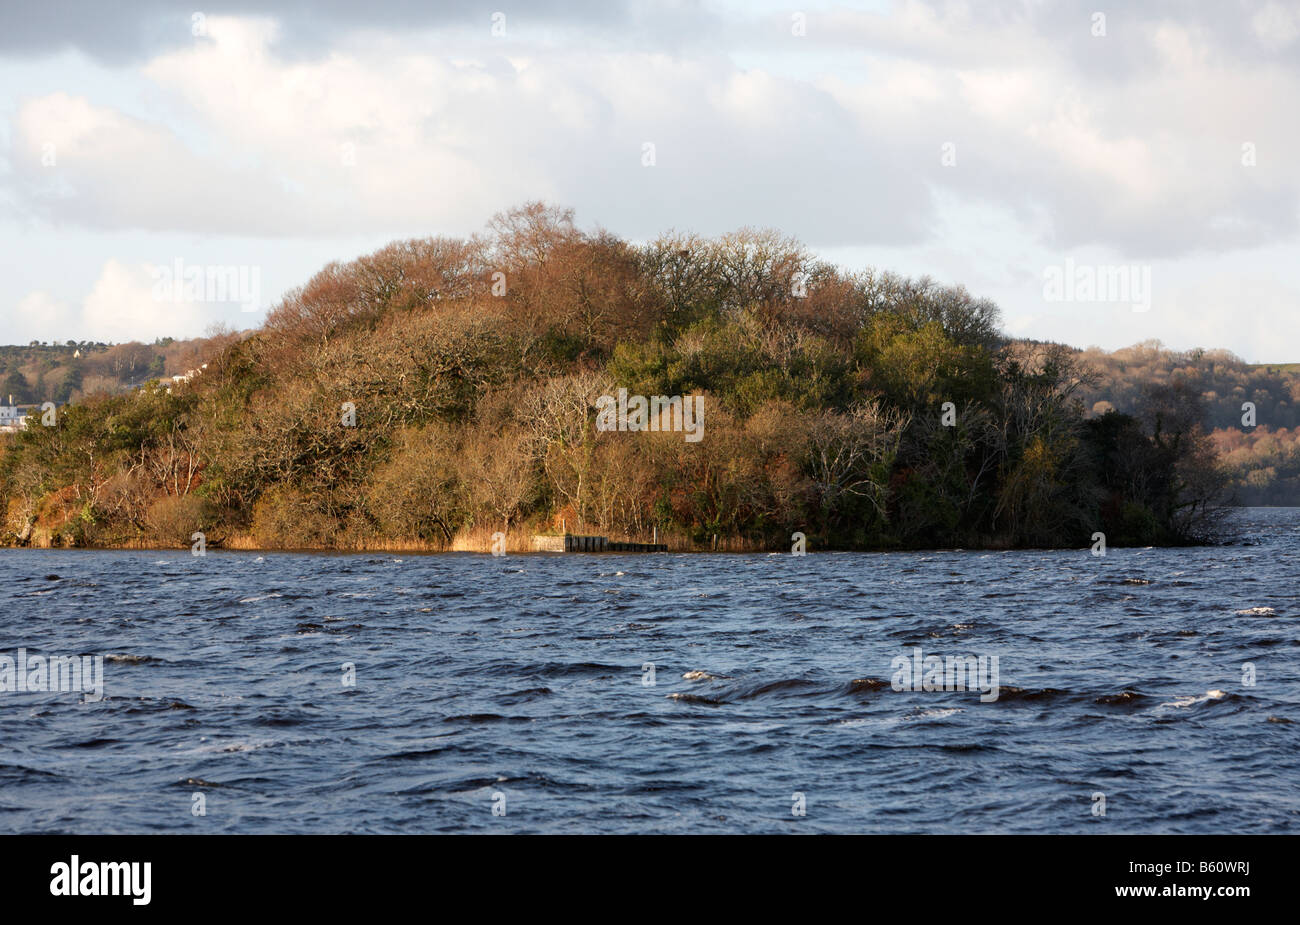 the lake isle of innisfree made famous in the poem by WB Yeats in lough gill county sligo republic of ireland Stock Photo